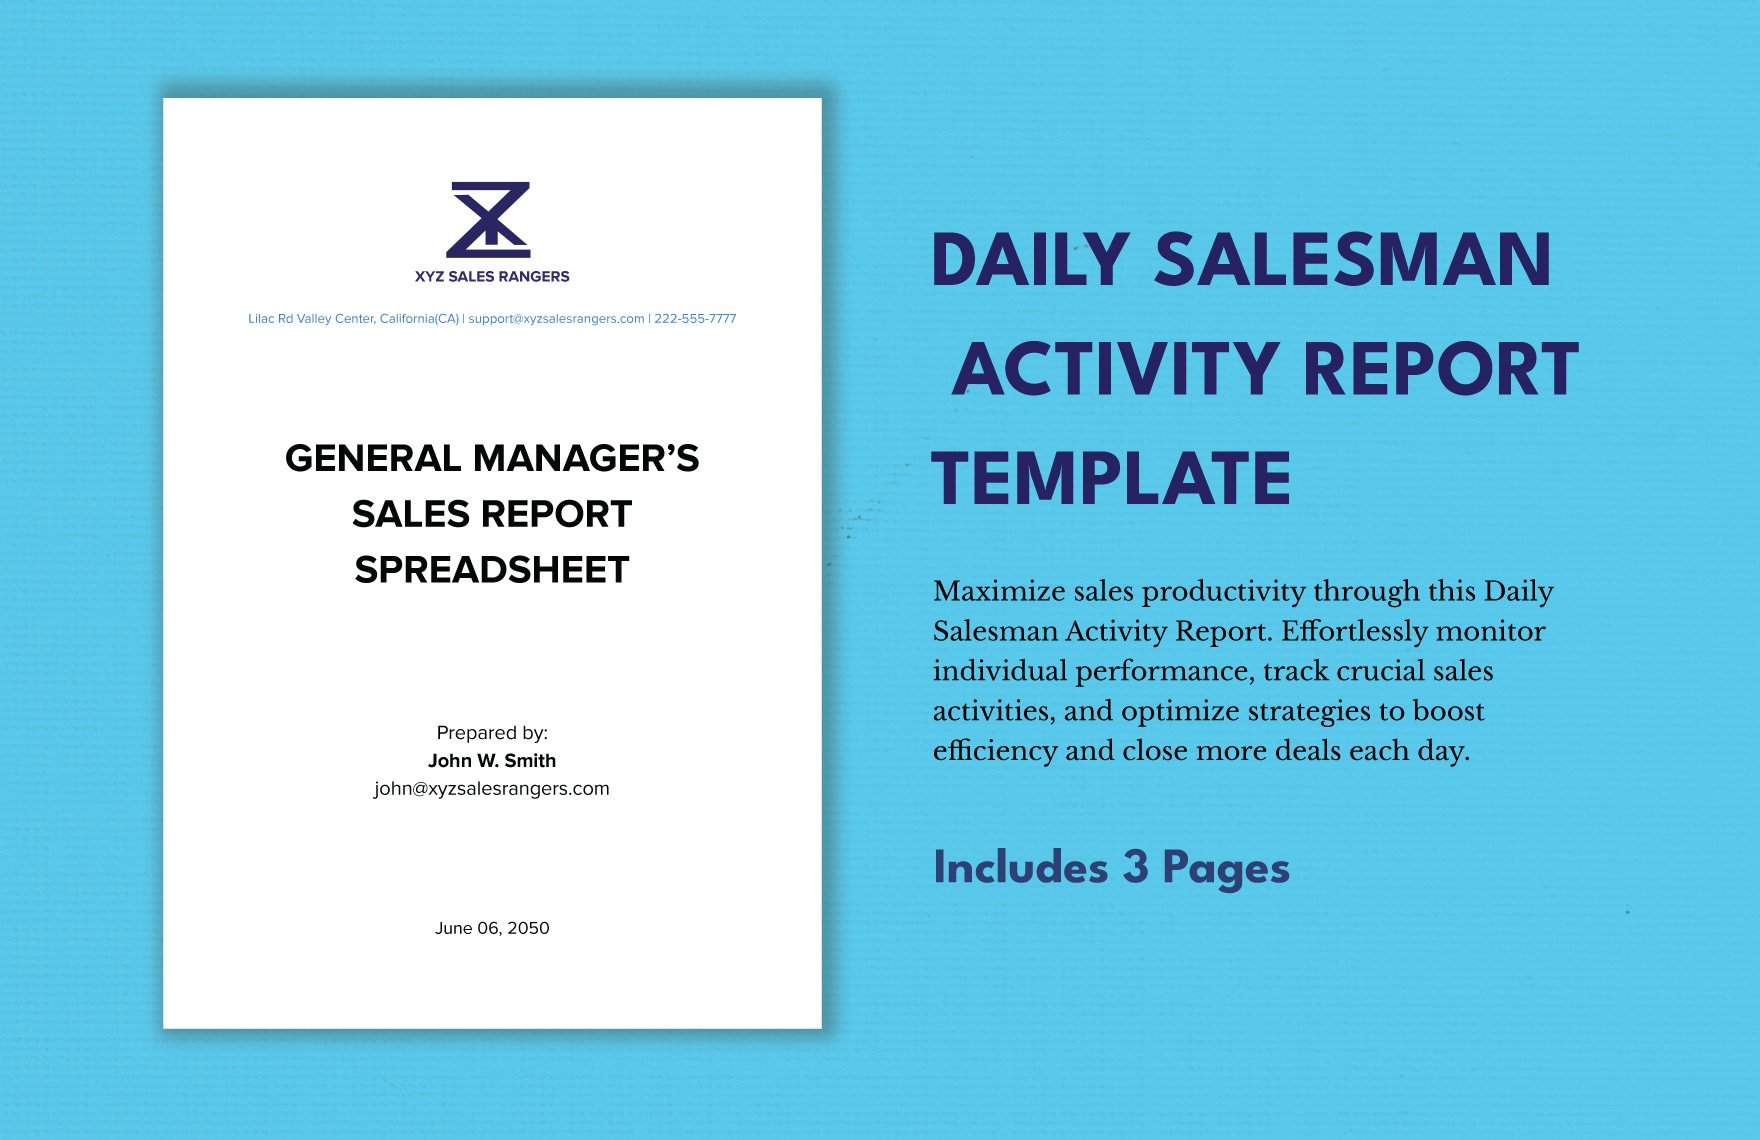 Daily Salesman Activity Report Template